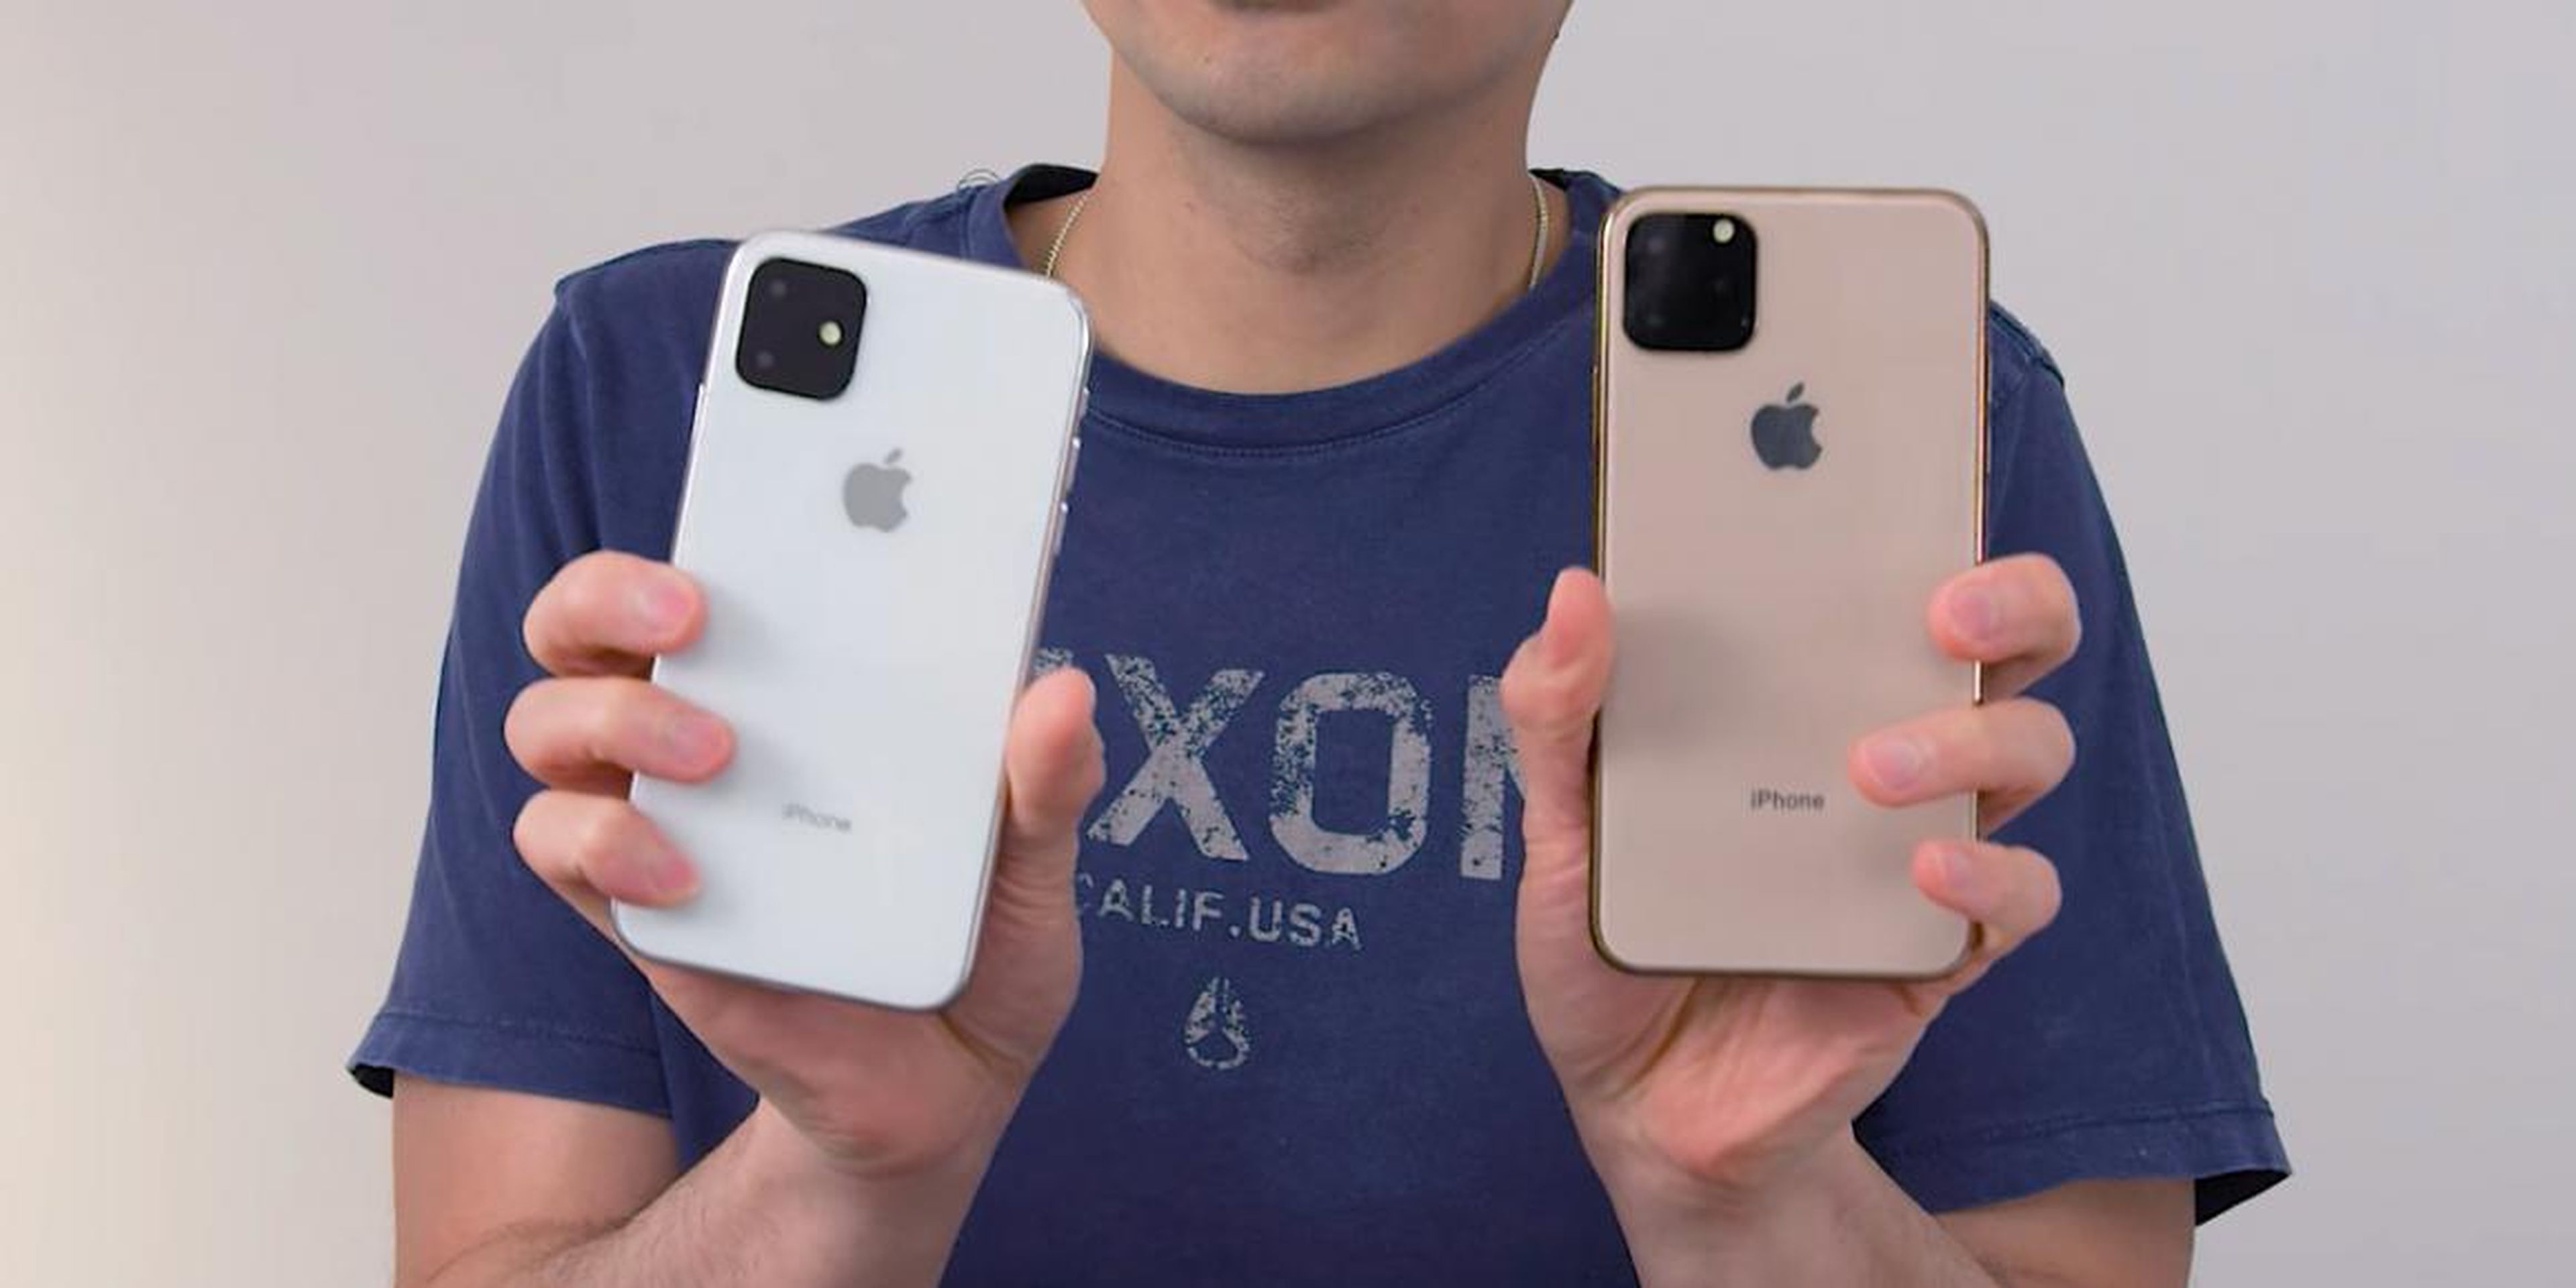 It's been pretty weird to see other tech companies surpass Apple in mobile photography, considering the iPhone was the standard for so long. With the iPhone 11, Apple has a chance to recover its crown.